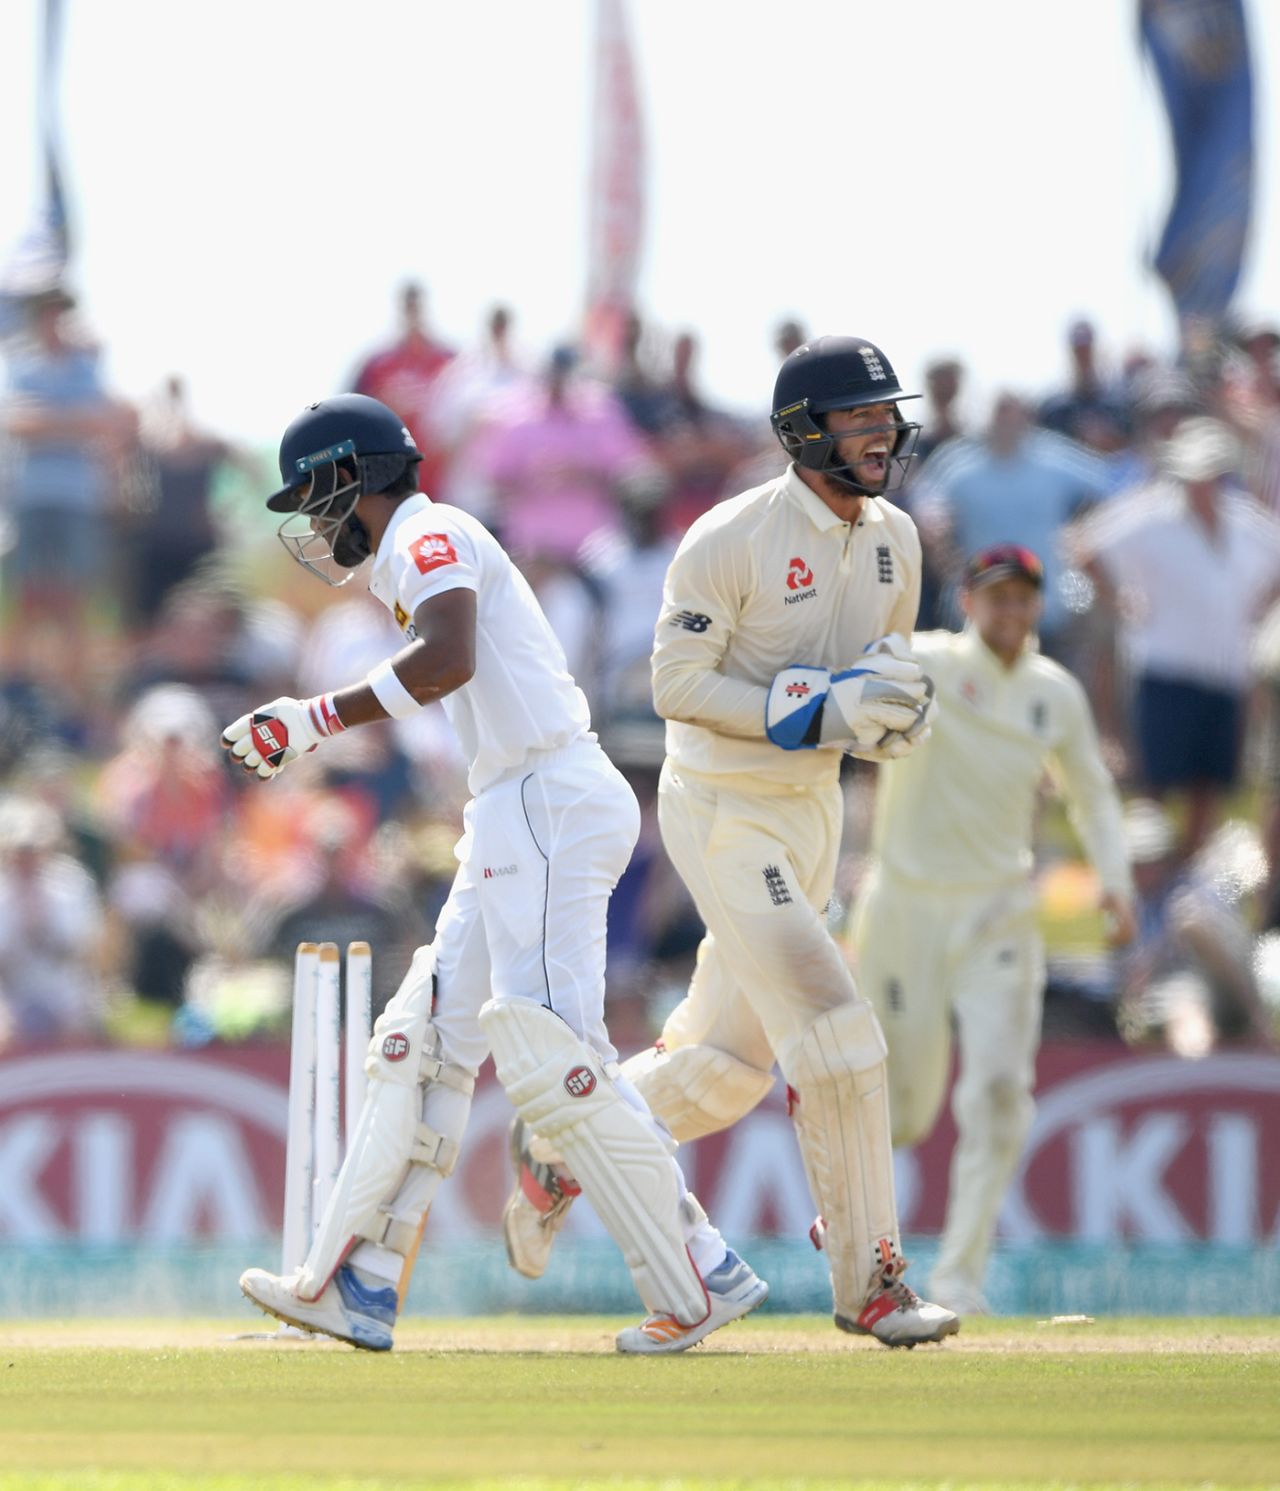 Ben Foakes completed the stumping of Dinesh Chandimal, Sri Lanka v England, 1st Test, Galle, 2nd day, November 7, 2018